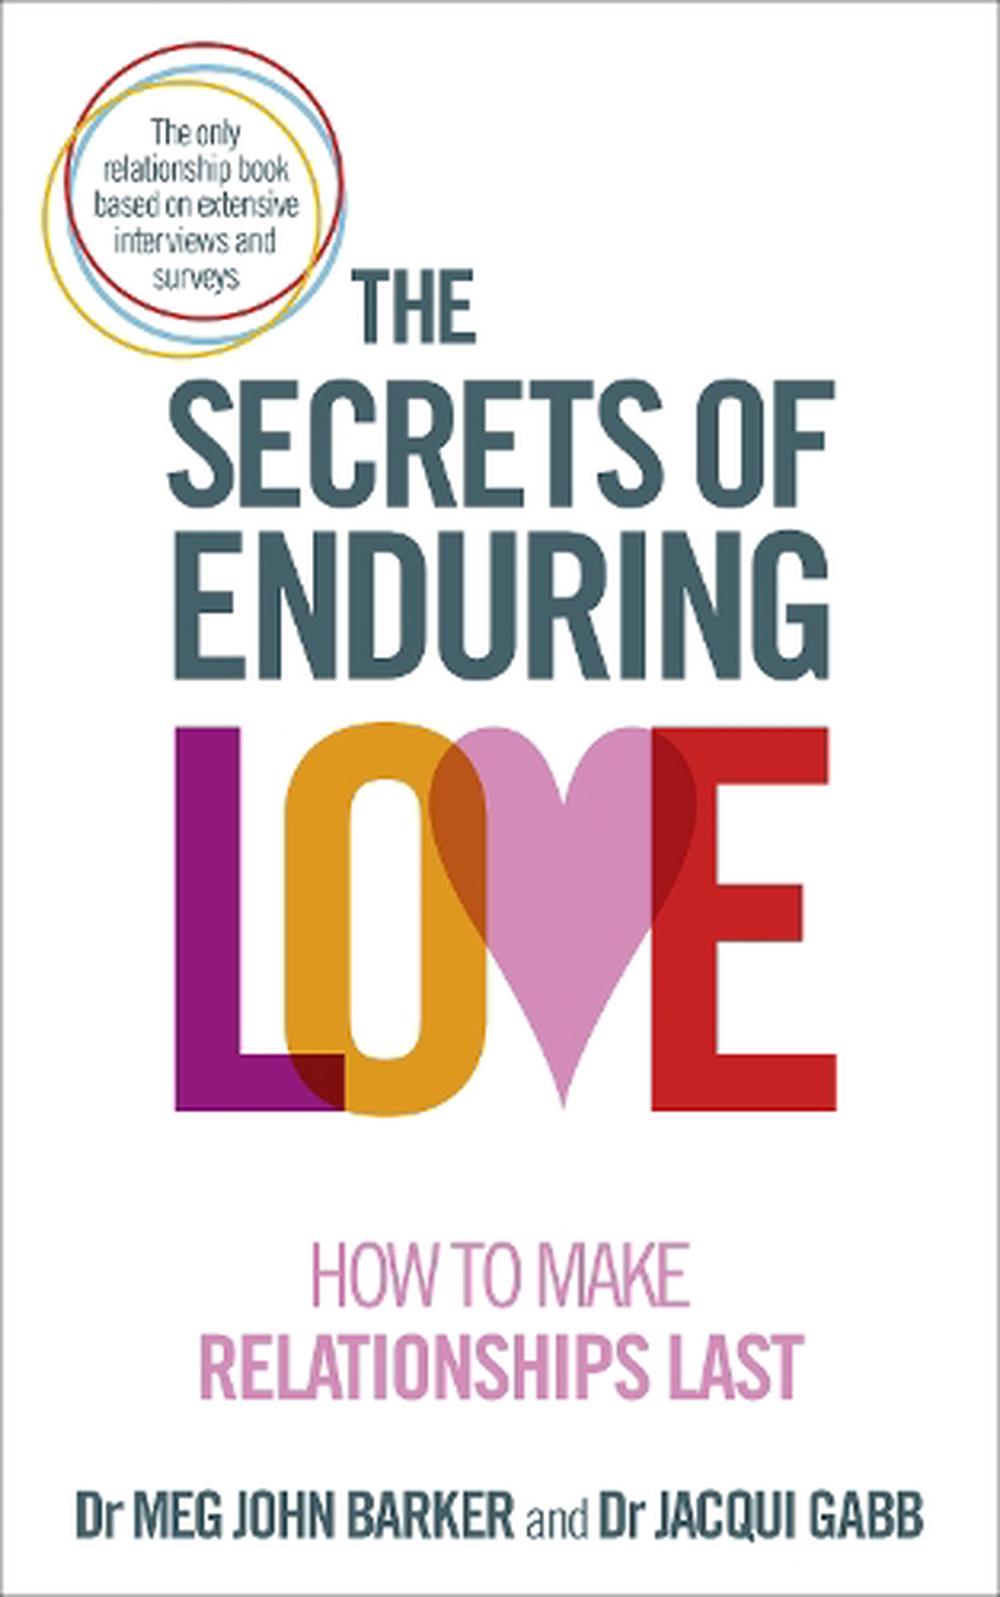 book review of enduring love